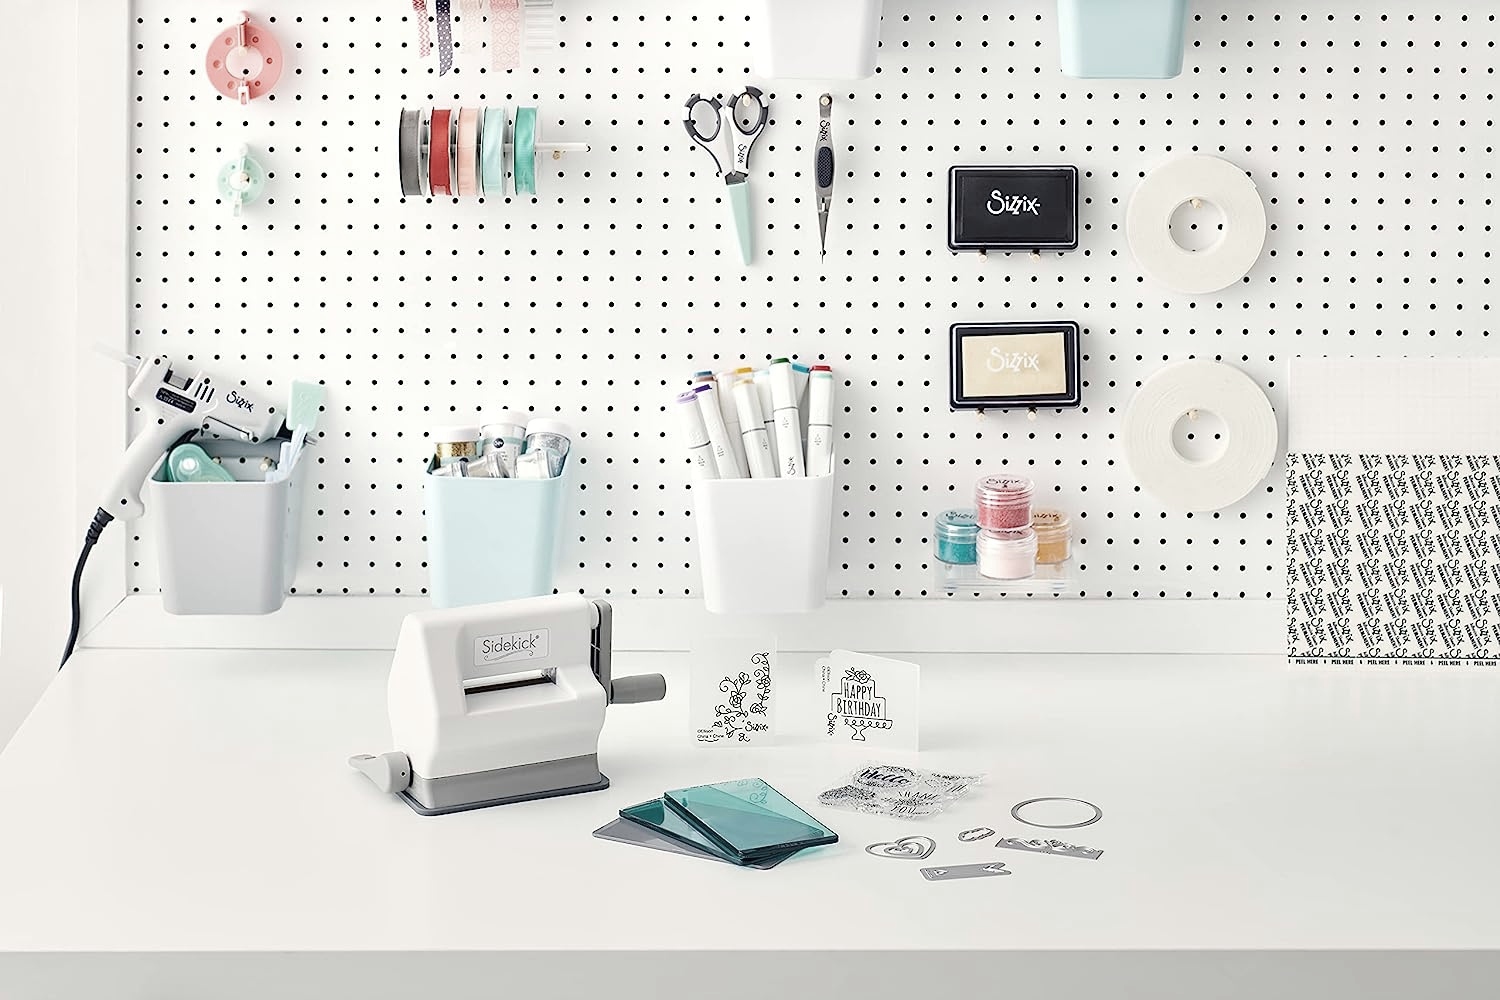 Whether you're into scrapbooking, cardmaking, or home decor projects, a die cut machine enables you to effortlessly cut intricate shapes, designs, and patterns with precision and ease.